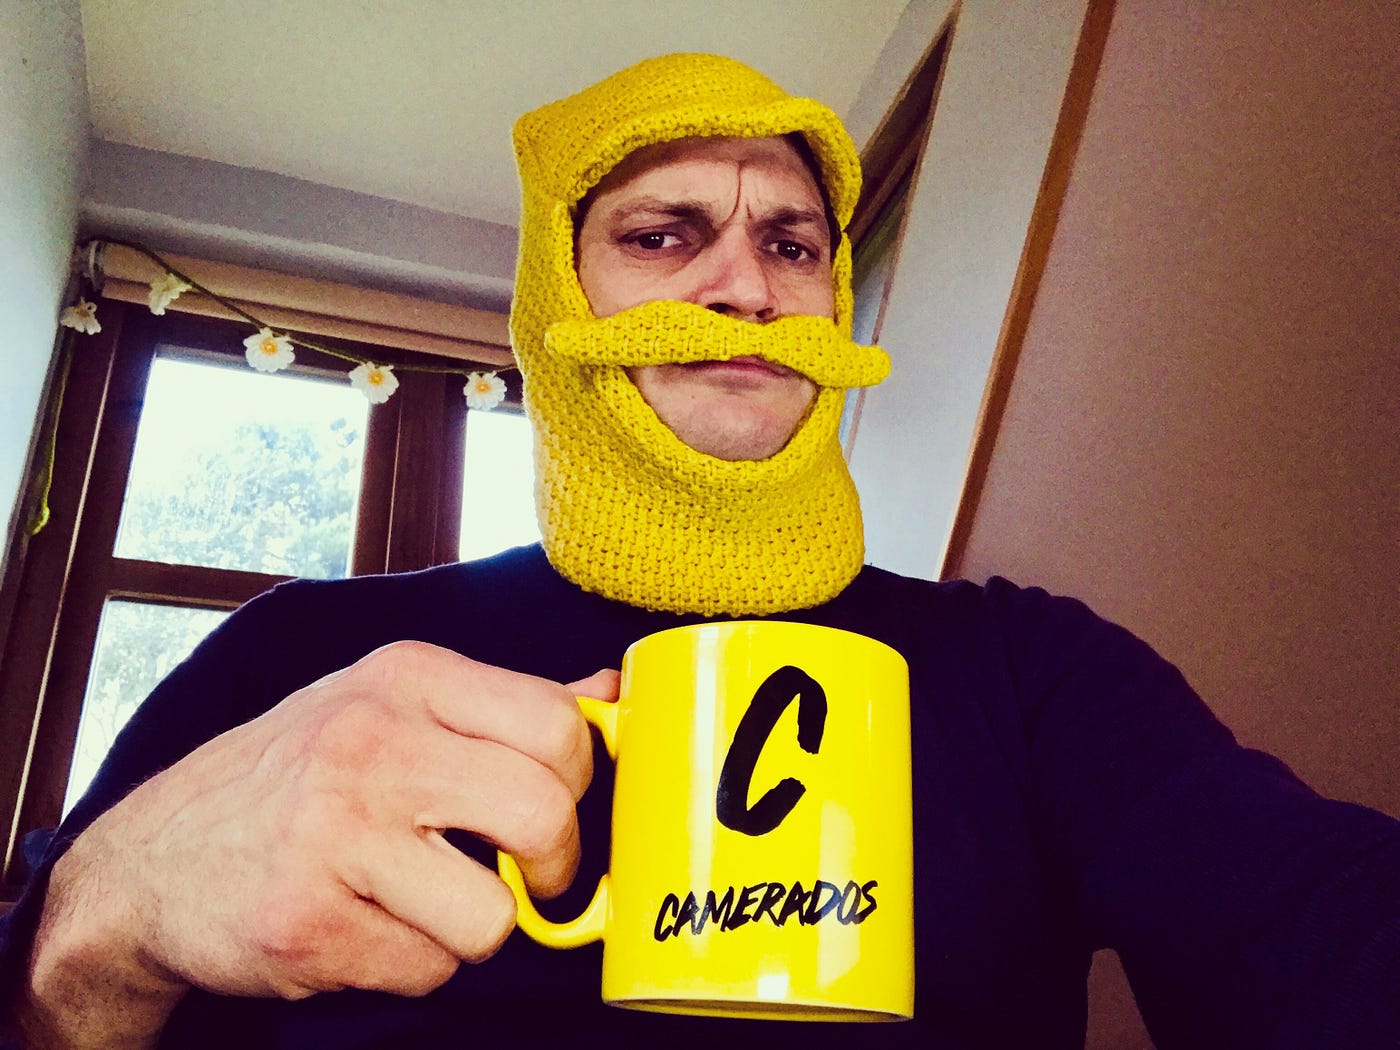 A man wearing a yellow hat that has a moustache holds up a yellow mug that has ‘Camerados’ on it.